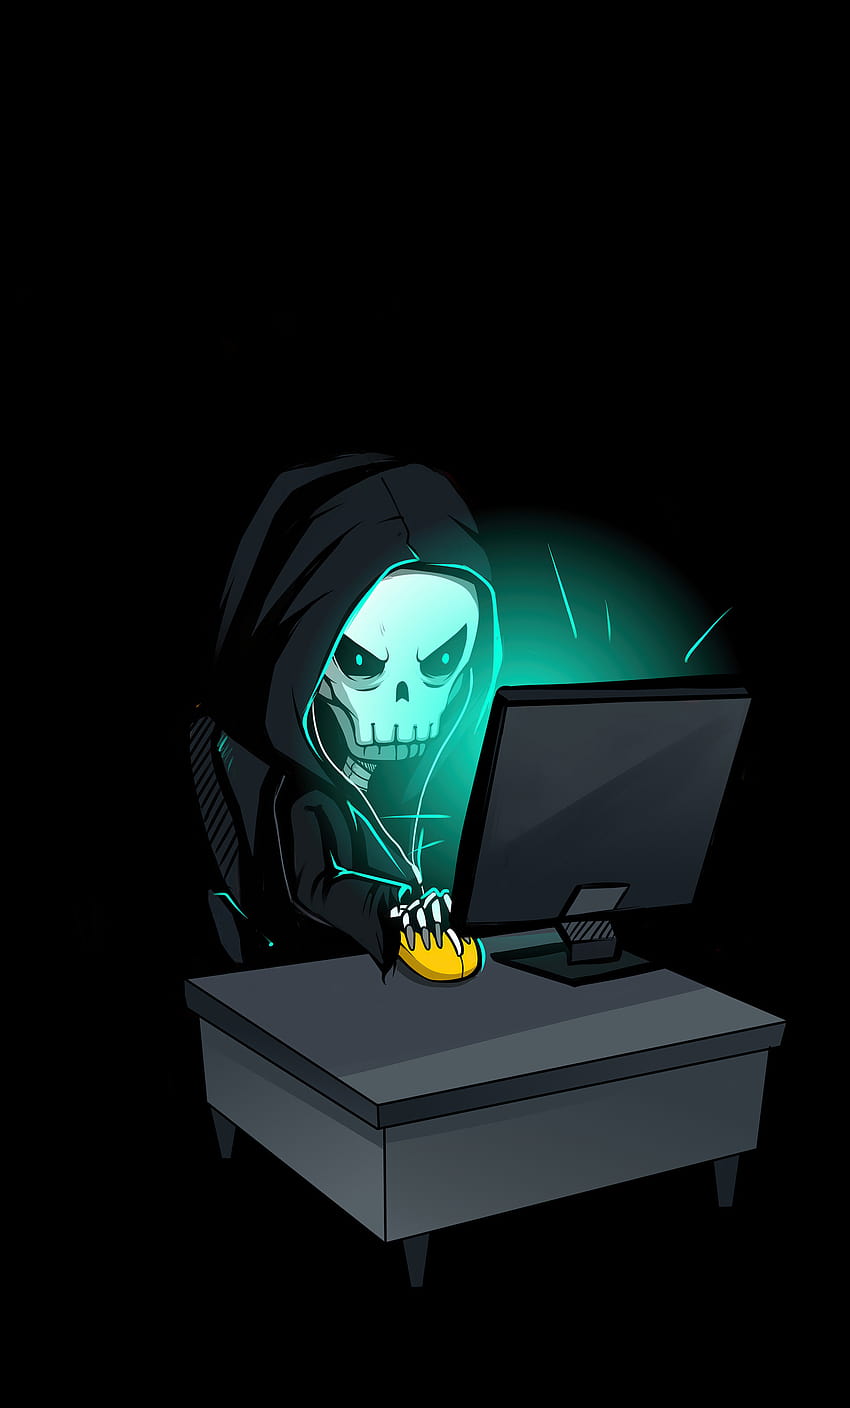 1280x2120 Skull Hacking Time iPhone , Backgrounds, and, skull cartoon HD phone wallpaper